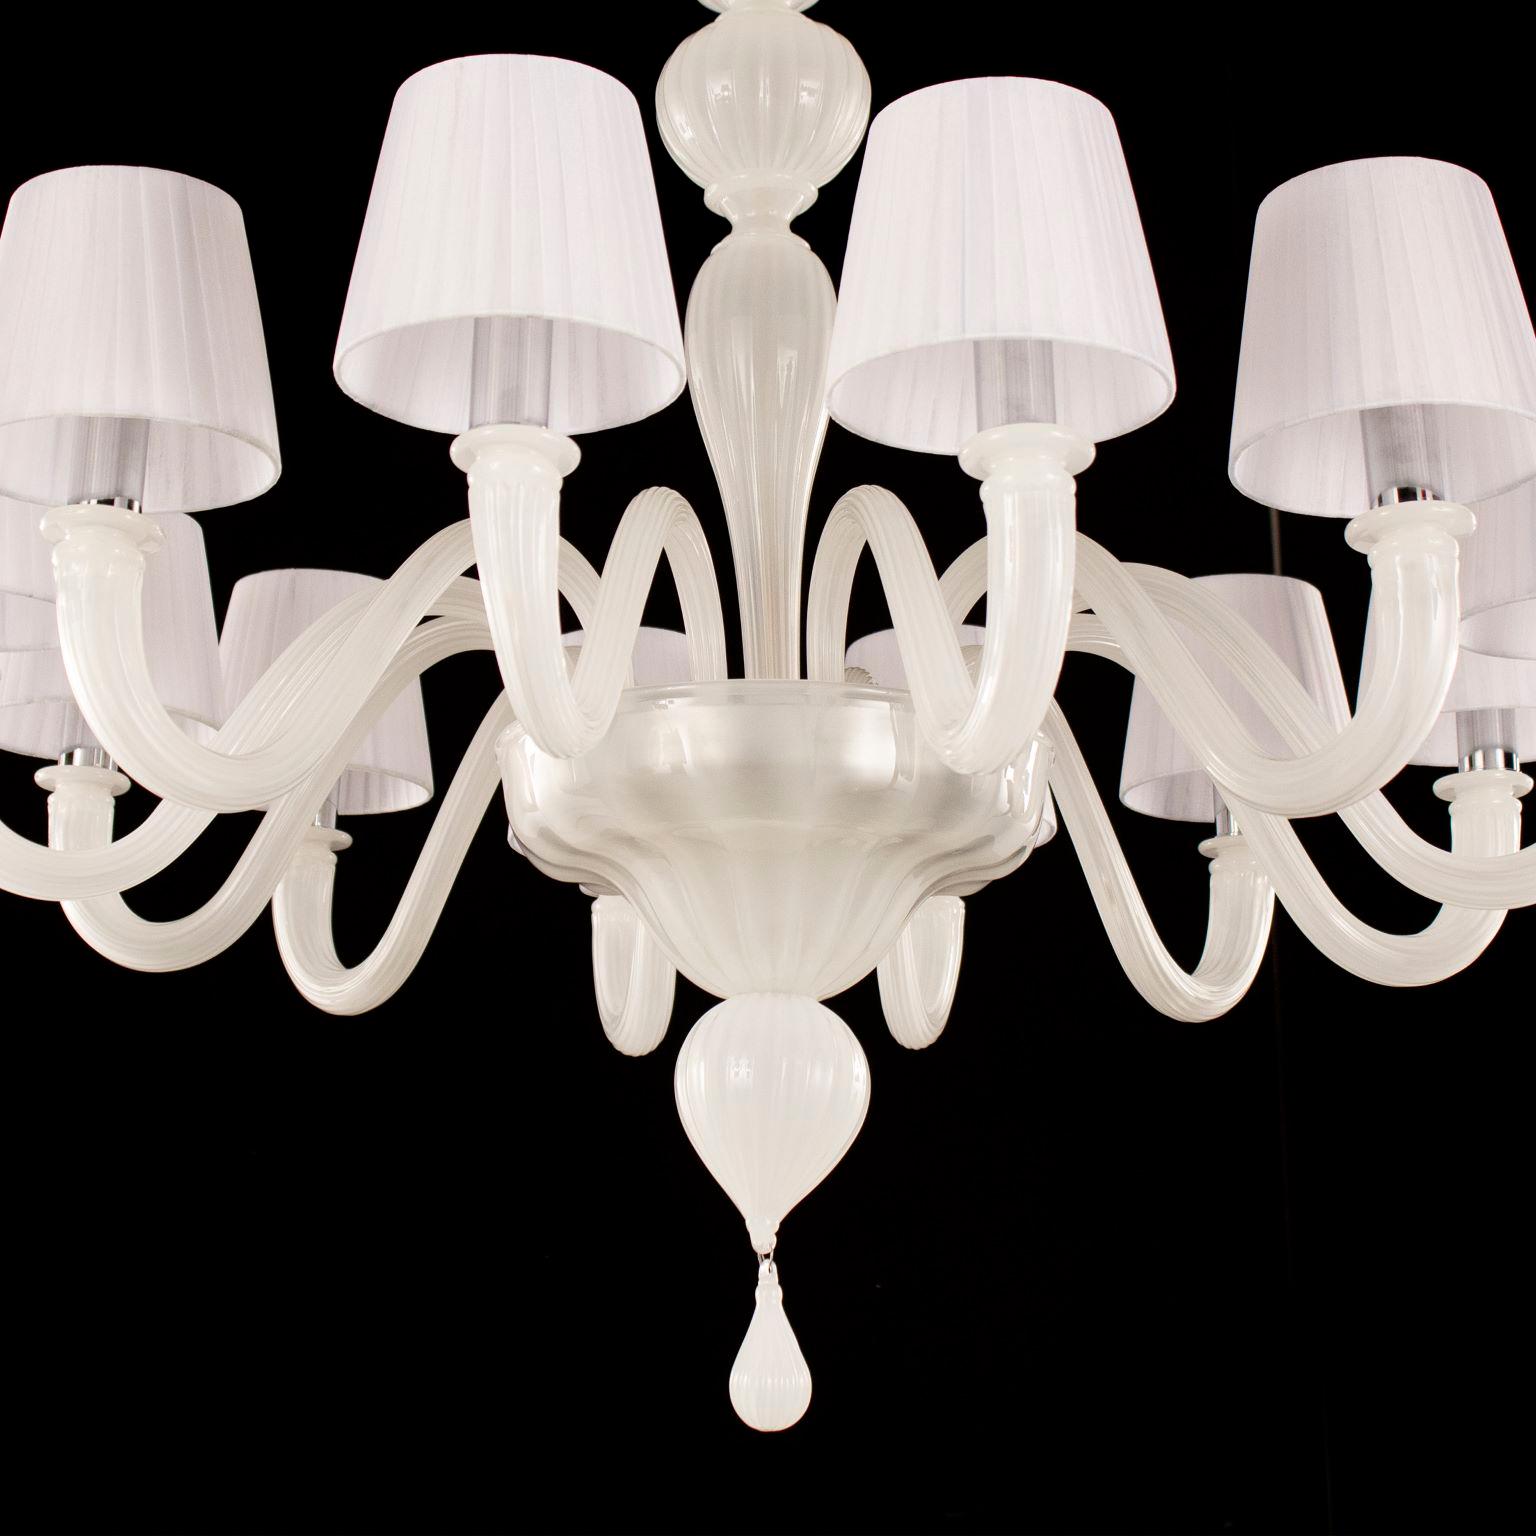 Chapeau chandelier 12 lights, artistic white silk Murano glass, white organza lampshades by Multiforme.
Chapeau is a Classic and essential chandelier, it is handcrafted using high quality materials in Murano glass and handmade cotton lampshades.